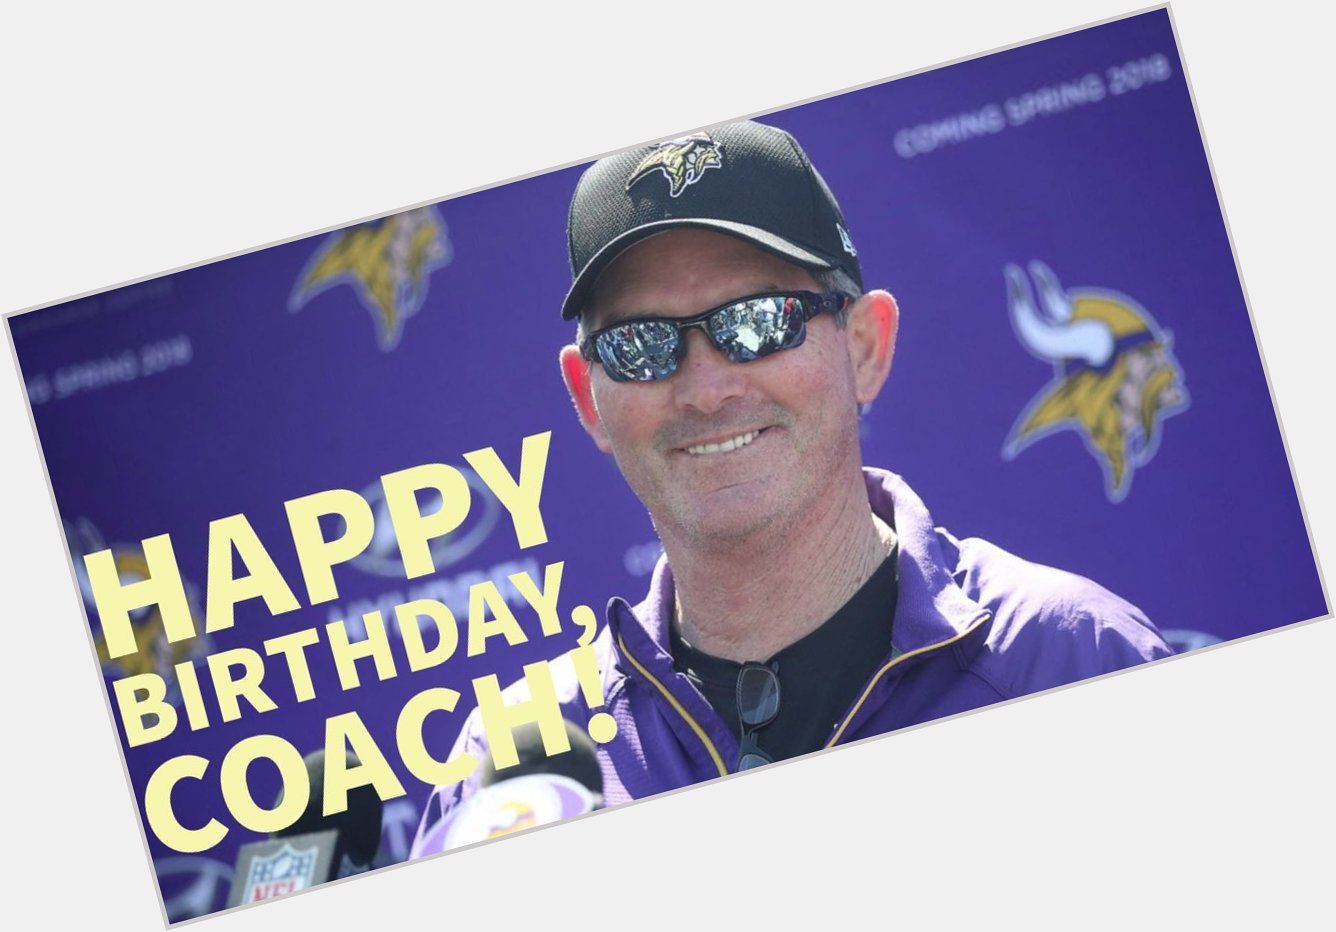 Wish Mike Zimmer a Happy Birthday! 